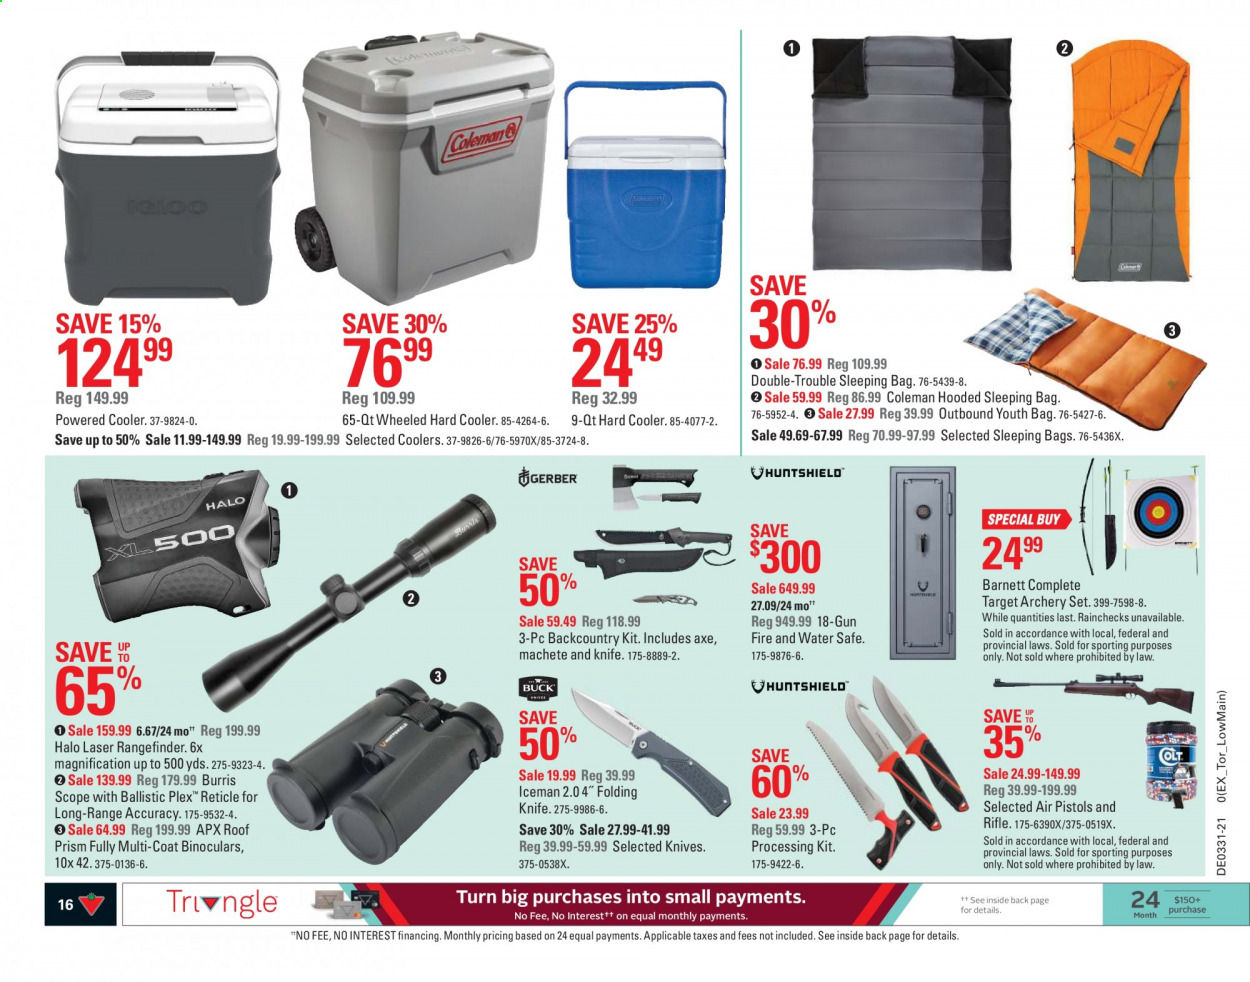 Canadian Tire flyer  - July 30, 2021 - August 05, 2021.